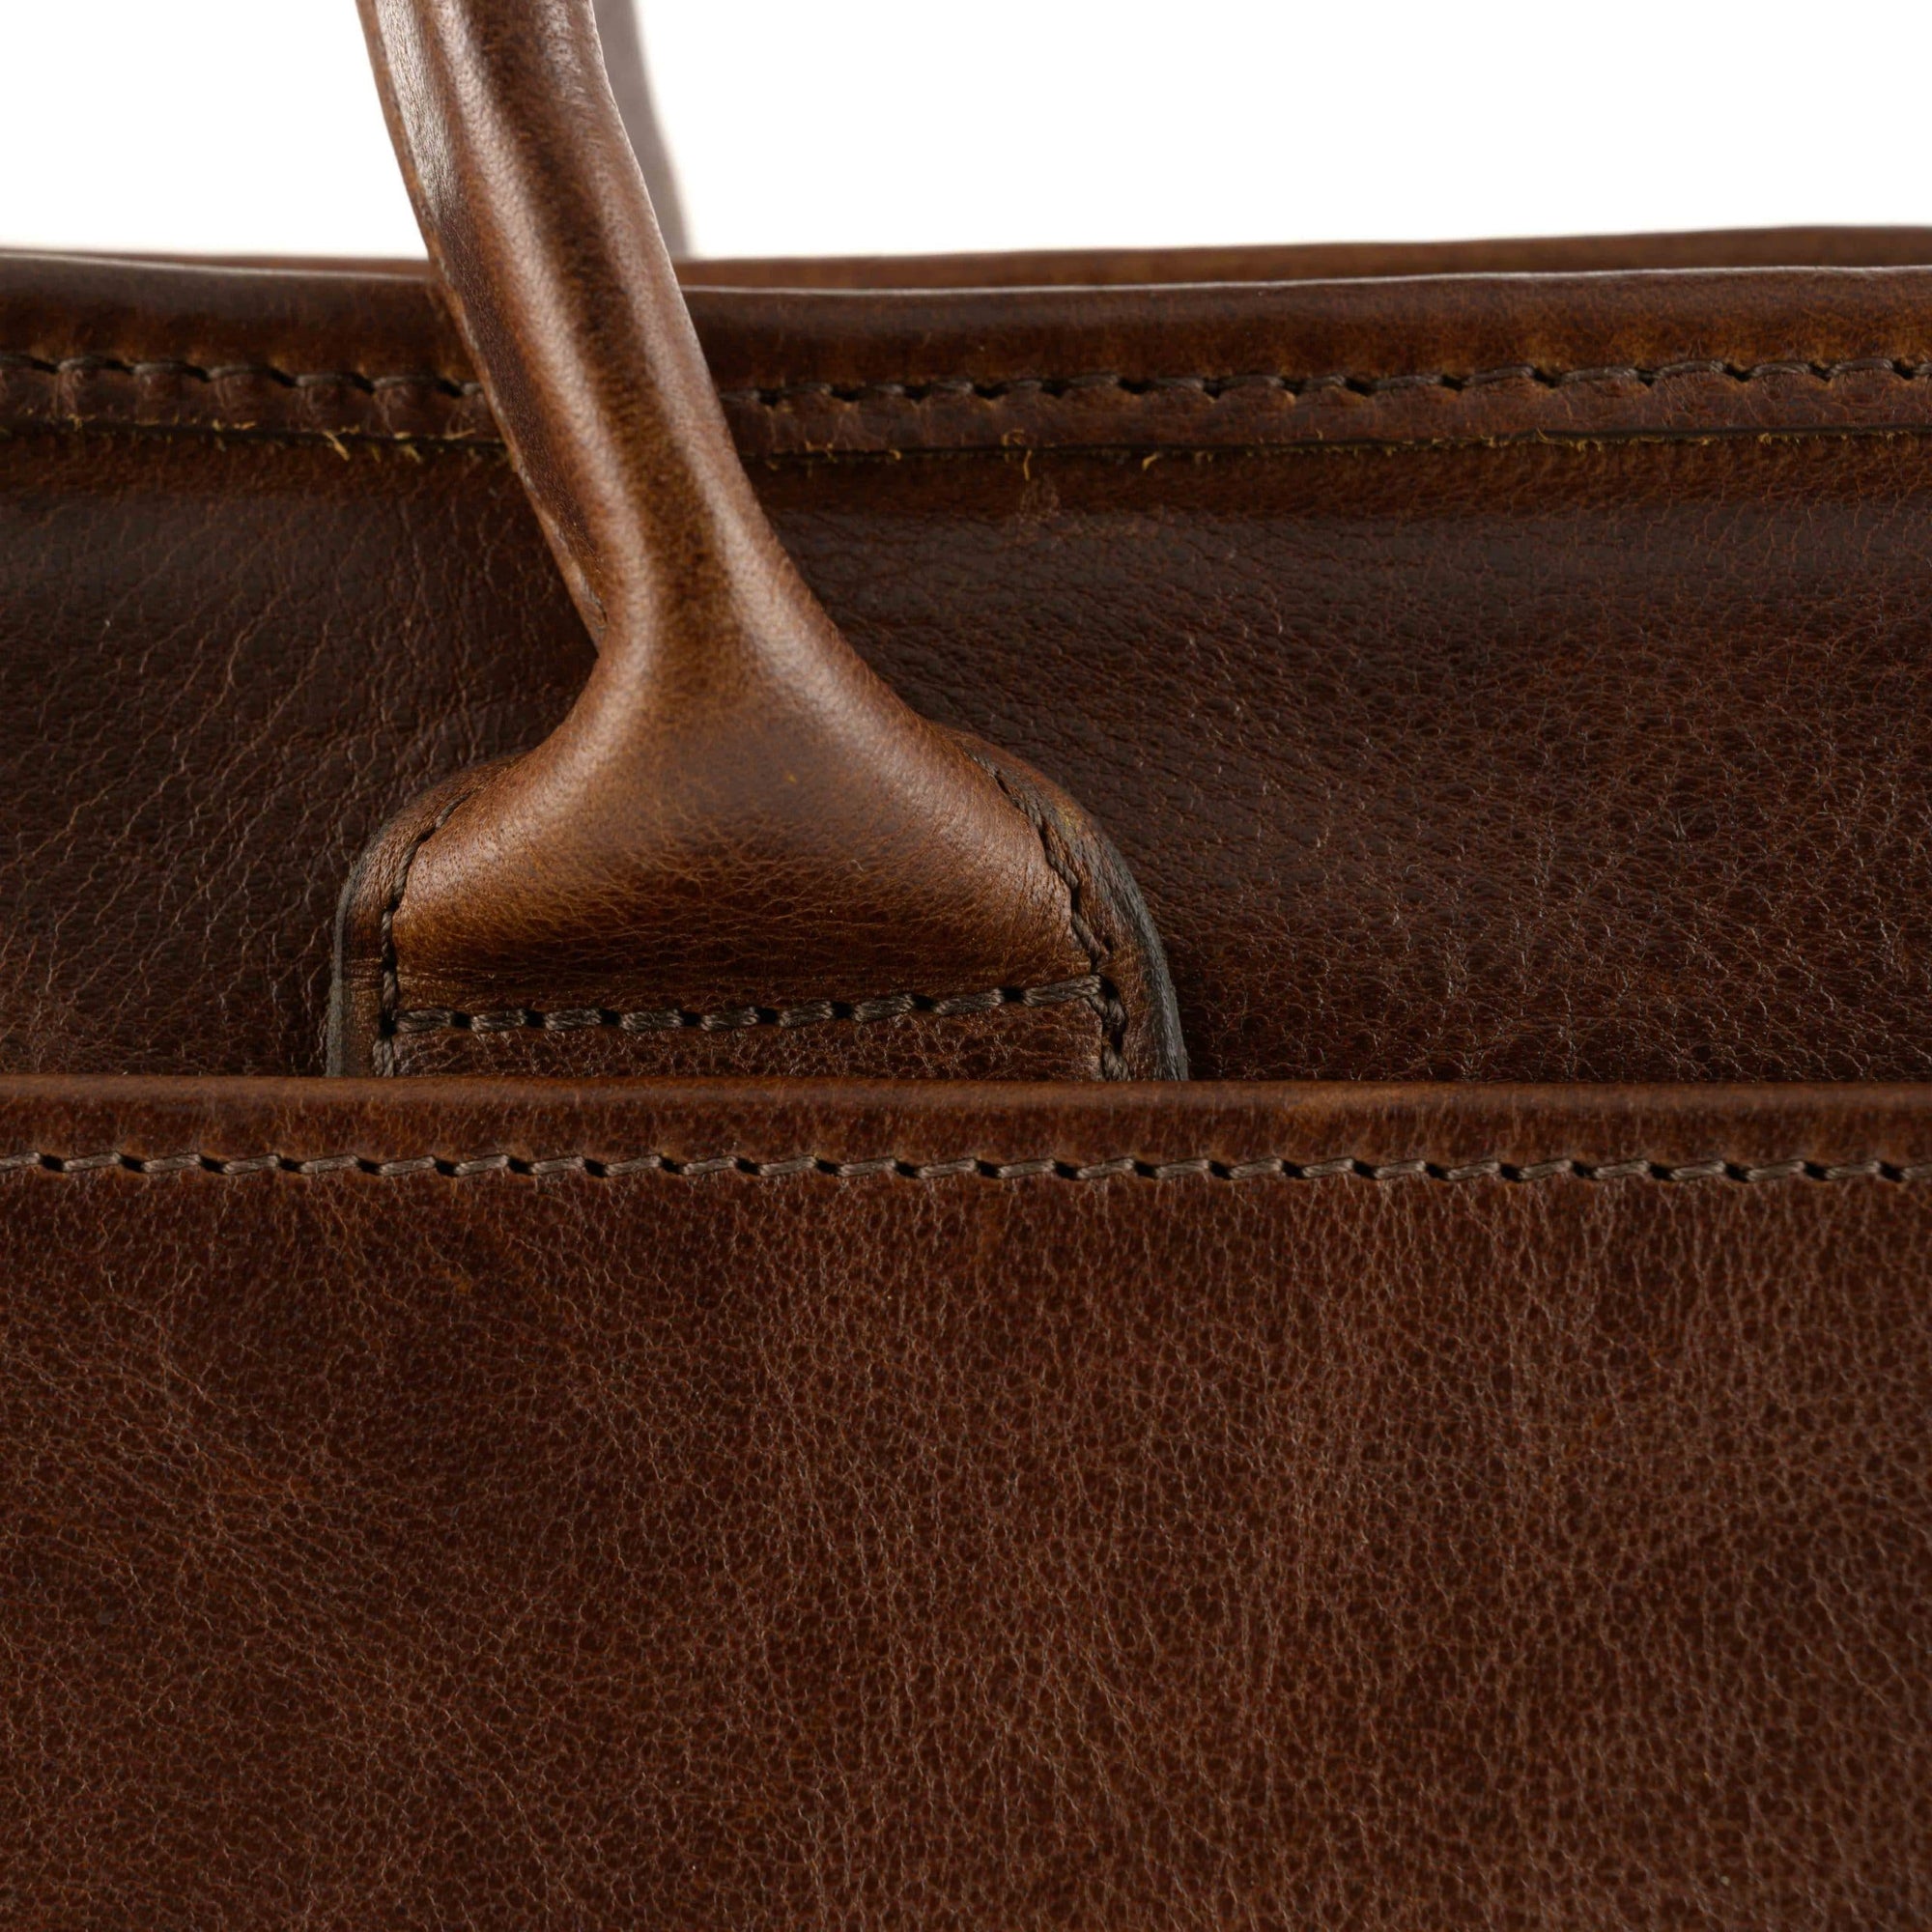 Miller Standard Attache in Titan Milled Brown by Moore & Giles